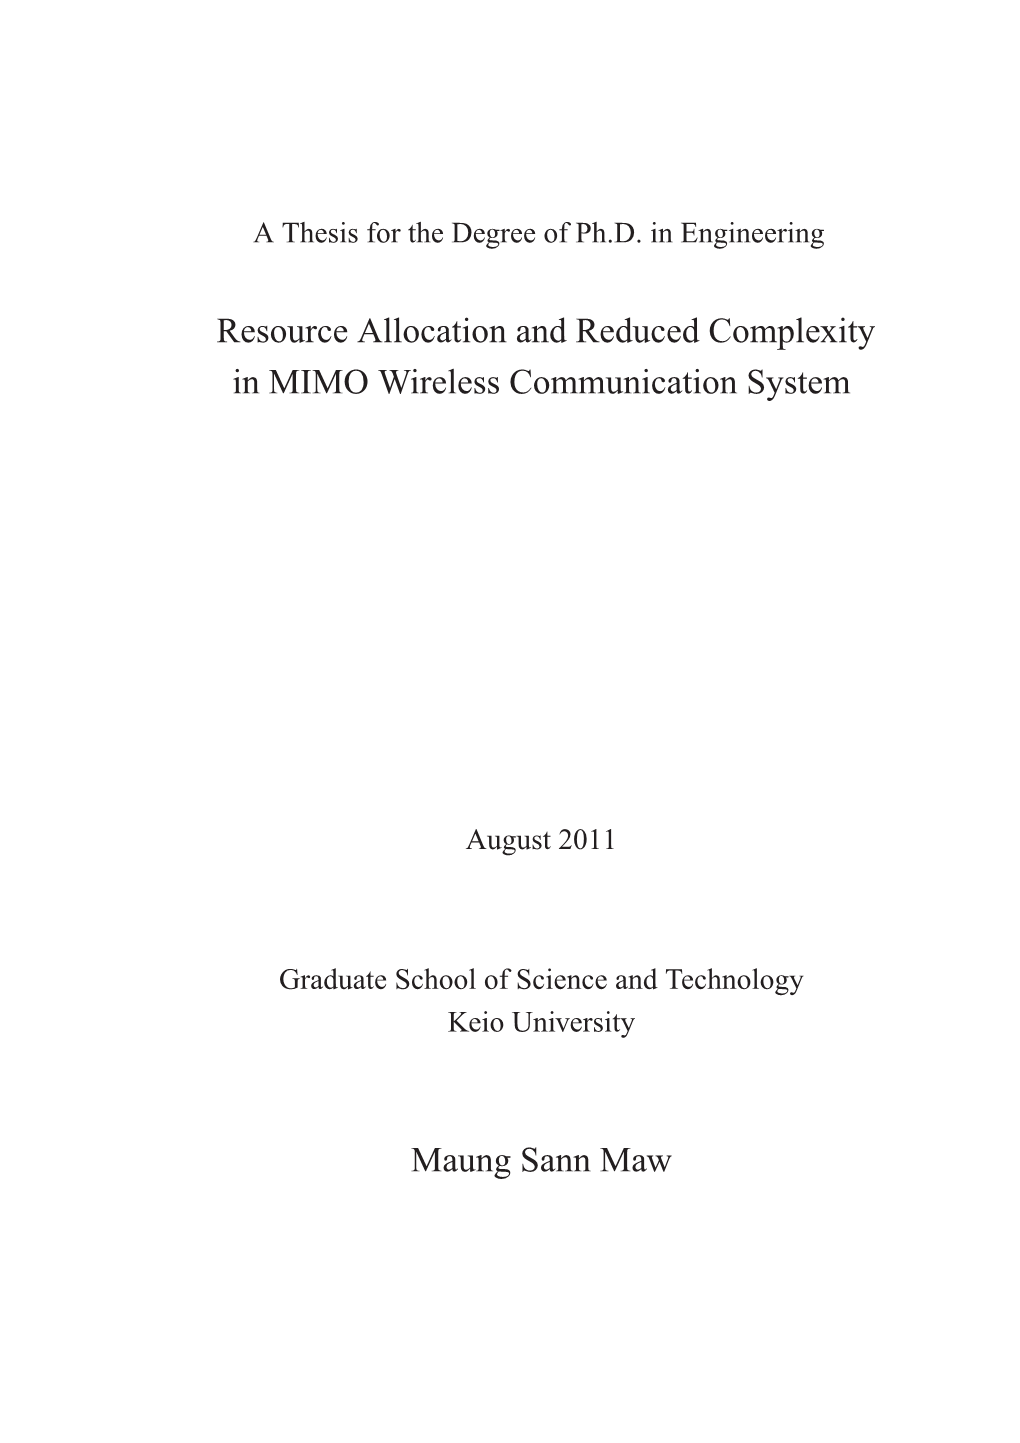 Resource Allocation and Reduced Complexity in MIMO Wireless Communication System